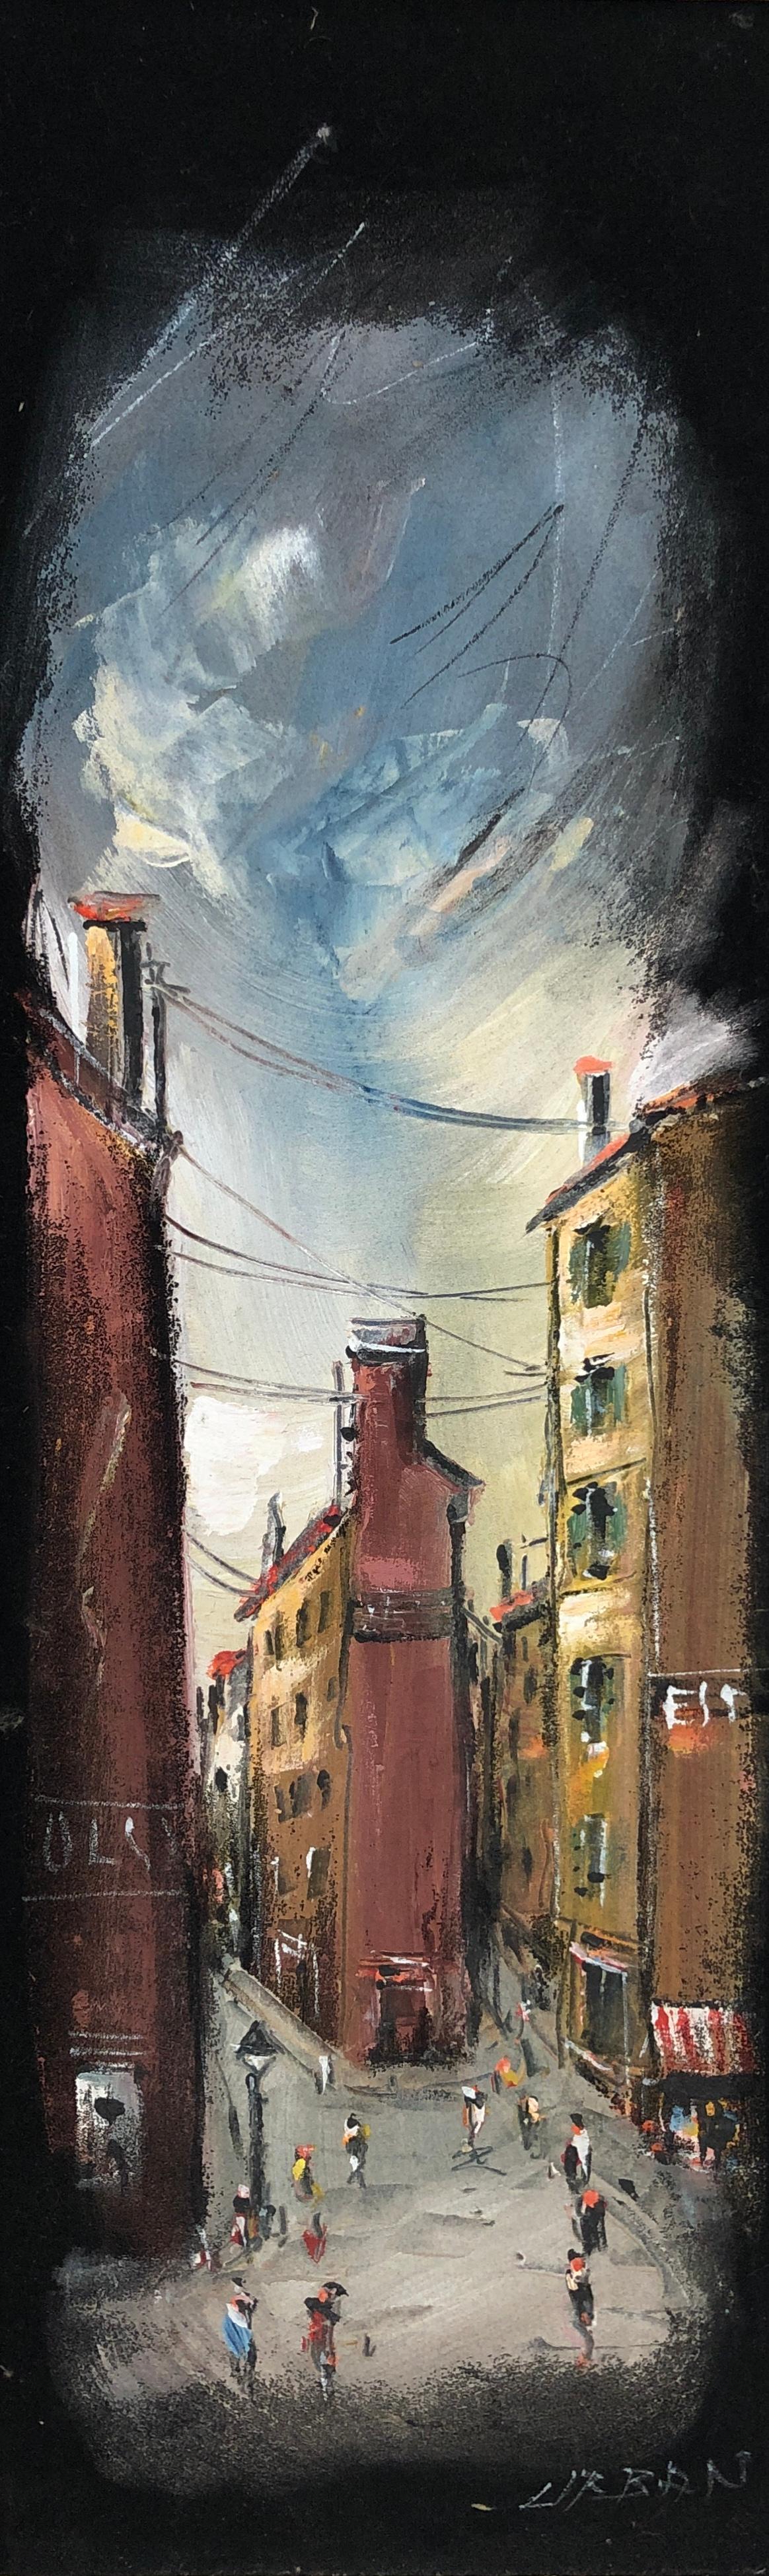 Hermann Urban Landscape Painting - Lively urban view